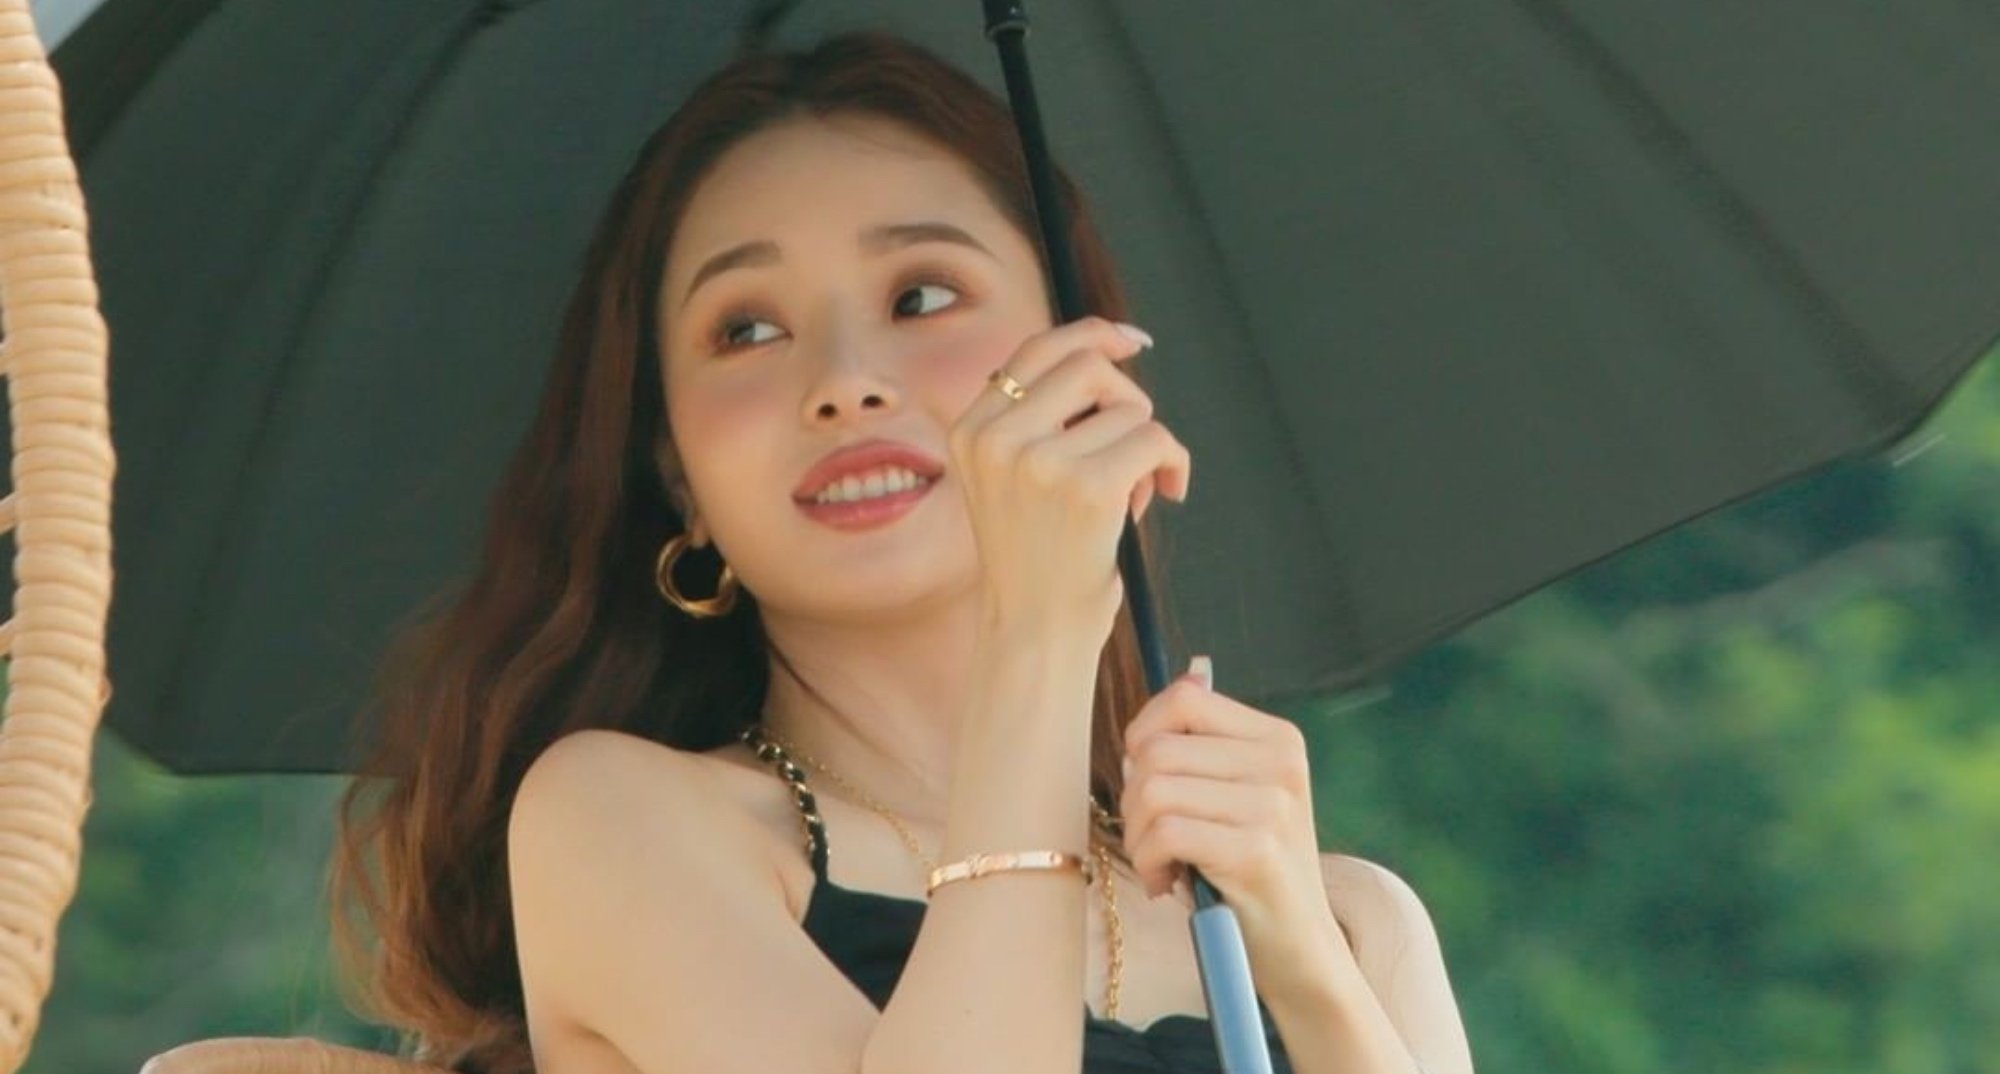 Song Ji-a on 'Single's Inferno' dating show on the beach with umbrella in relation to controversy.